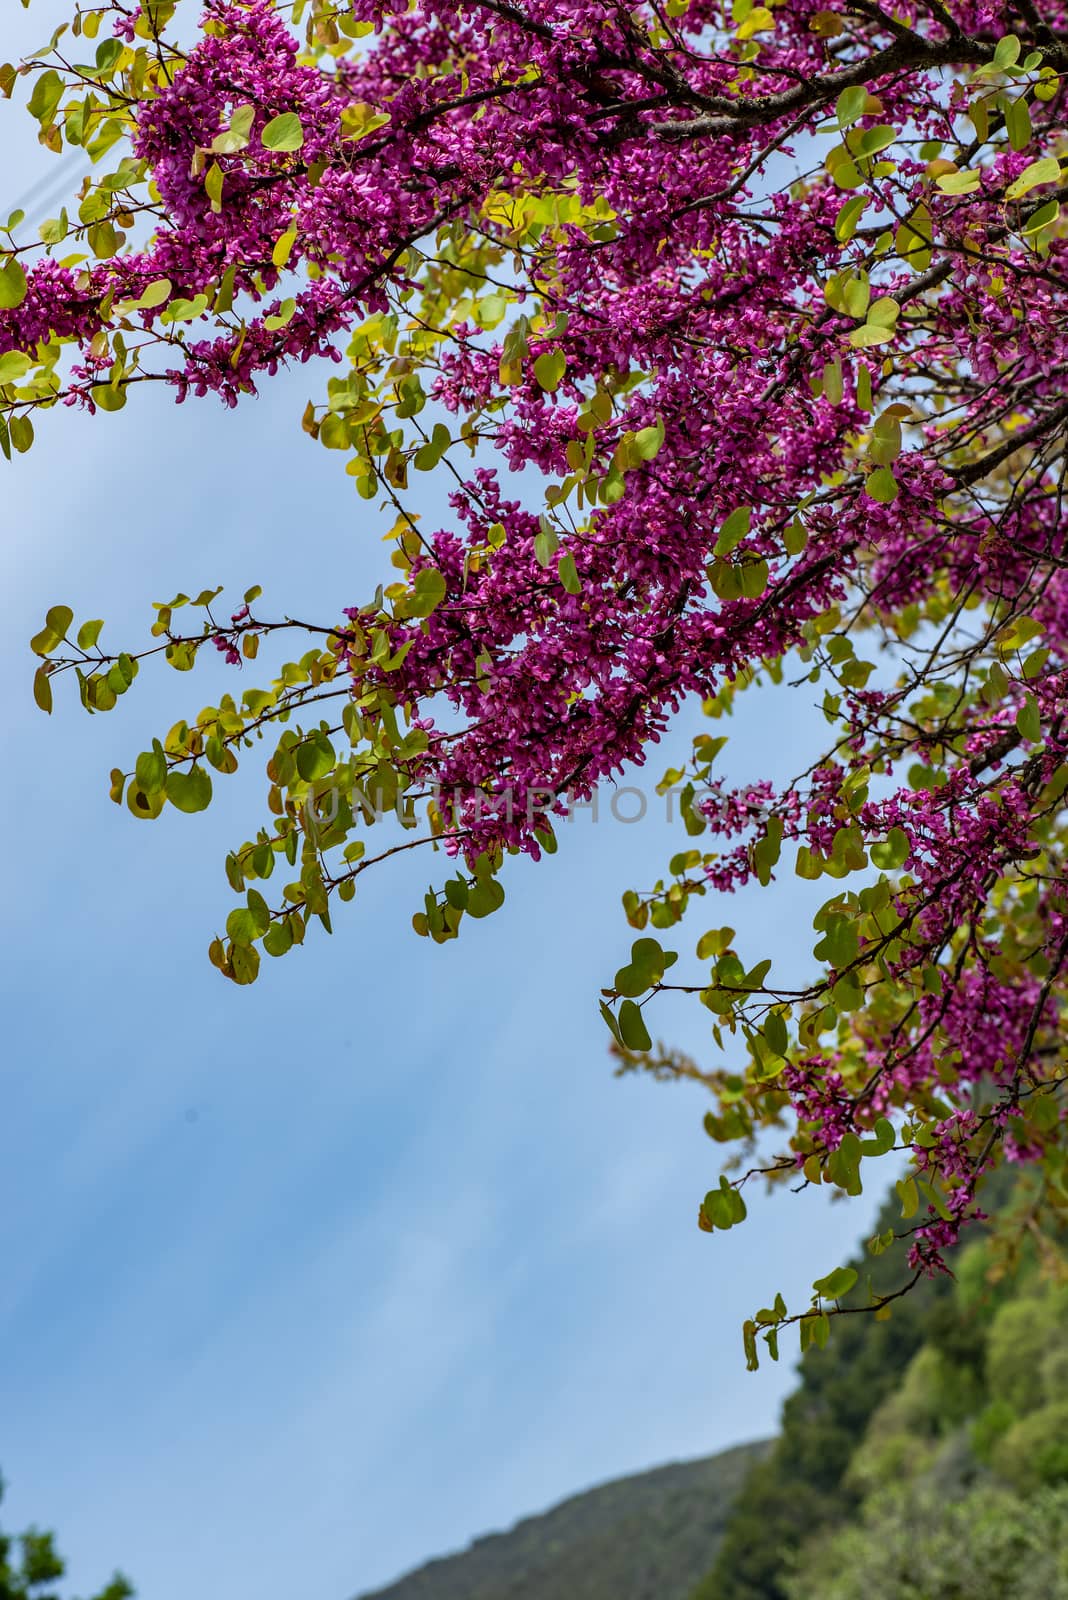 tree with purple leaves in summer by carfedeph